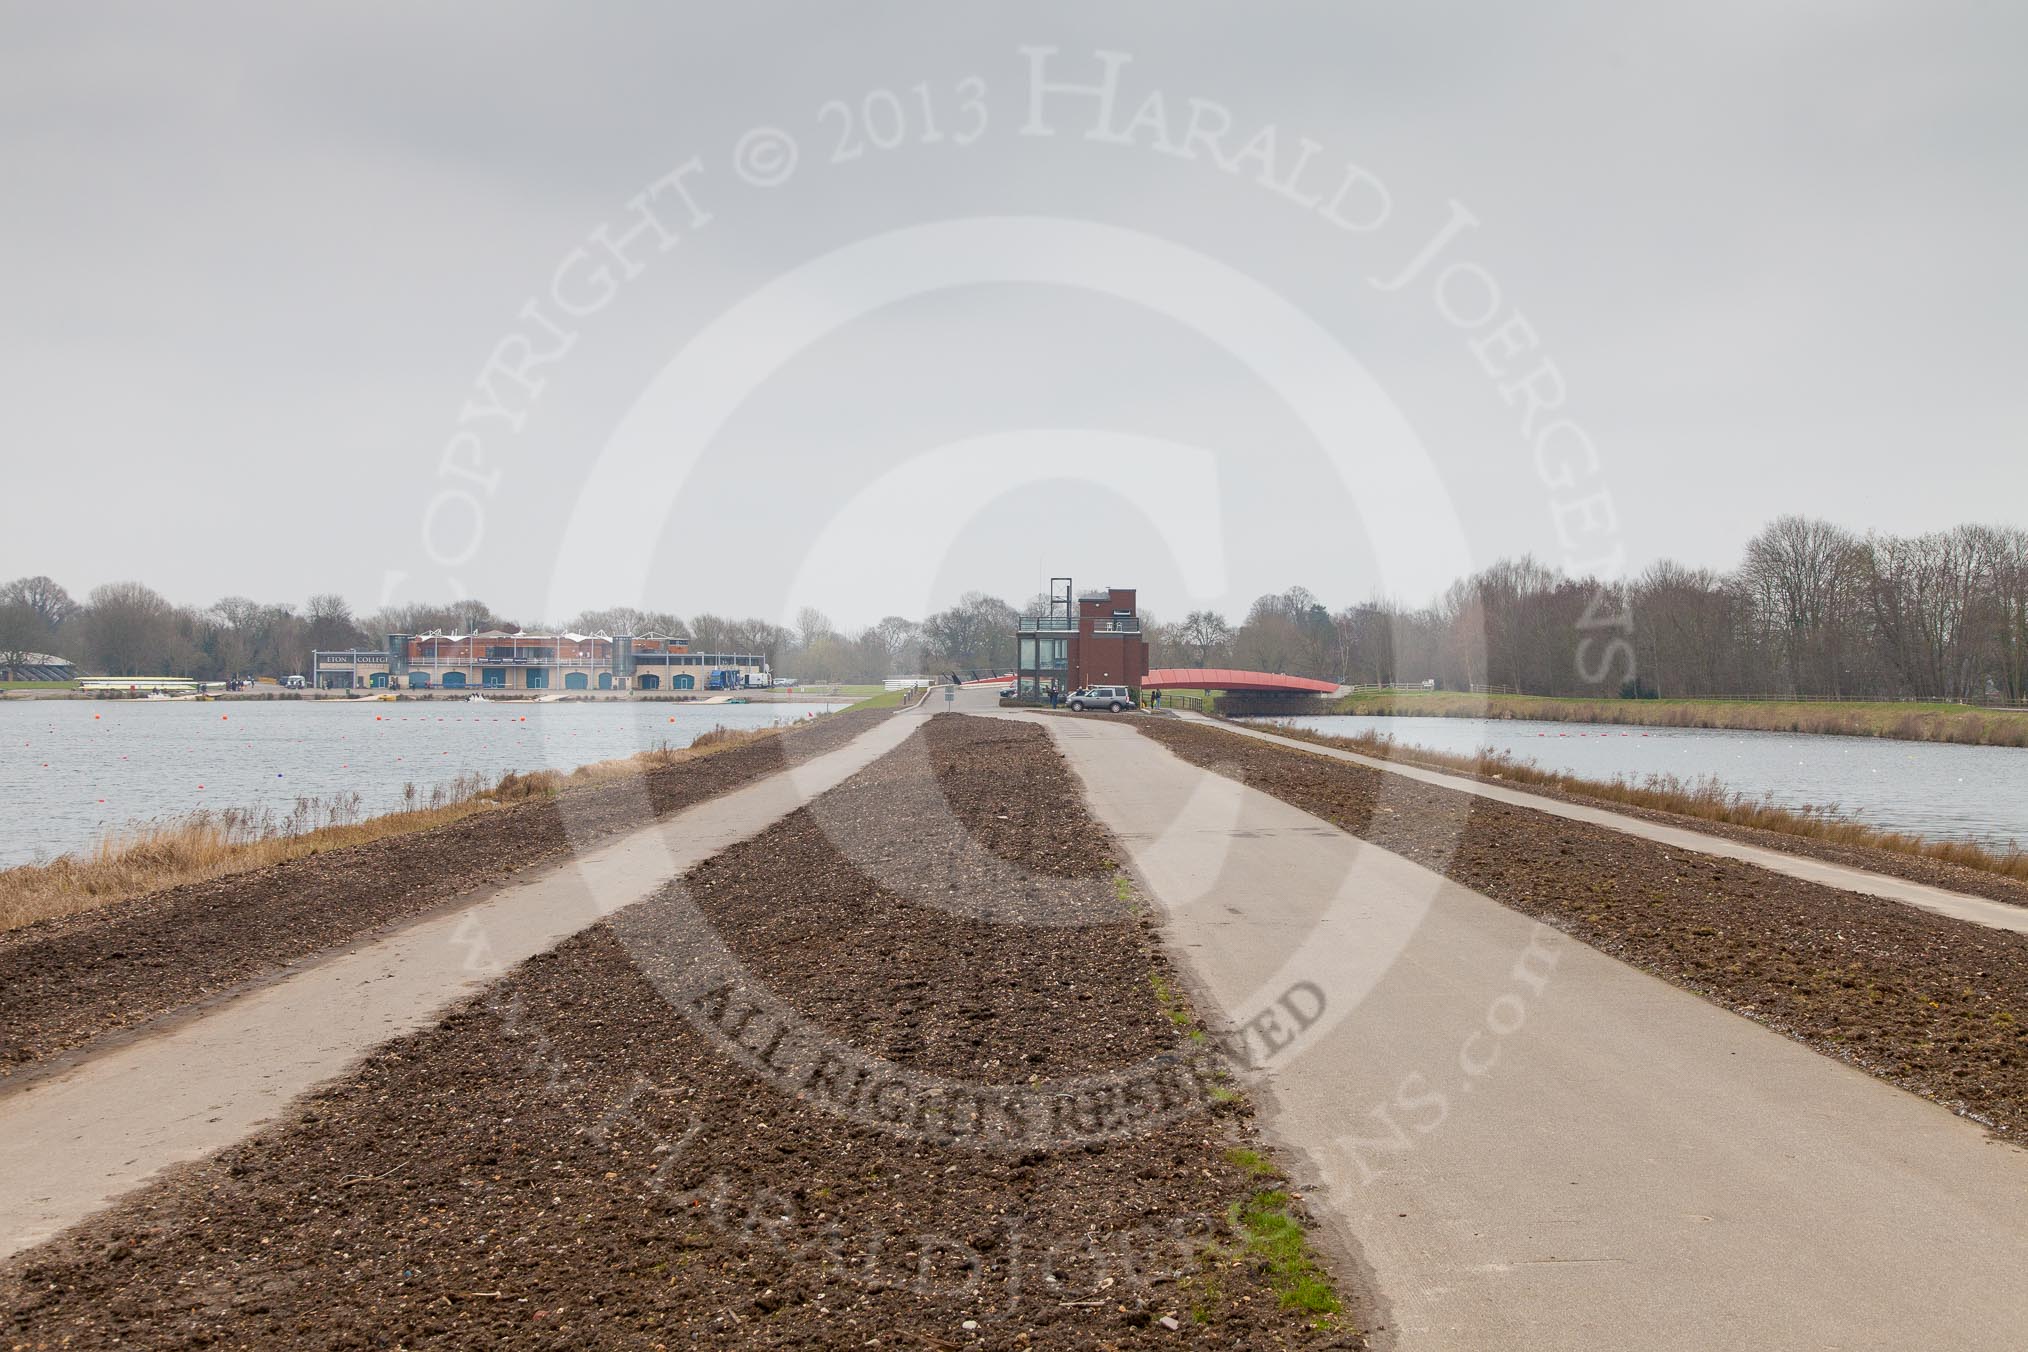 To put the photos into perspective - that's the view from the camera position towards the Dorney Lake boathouse.